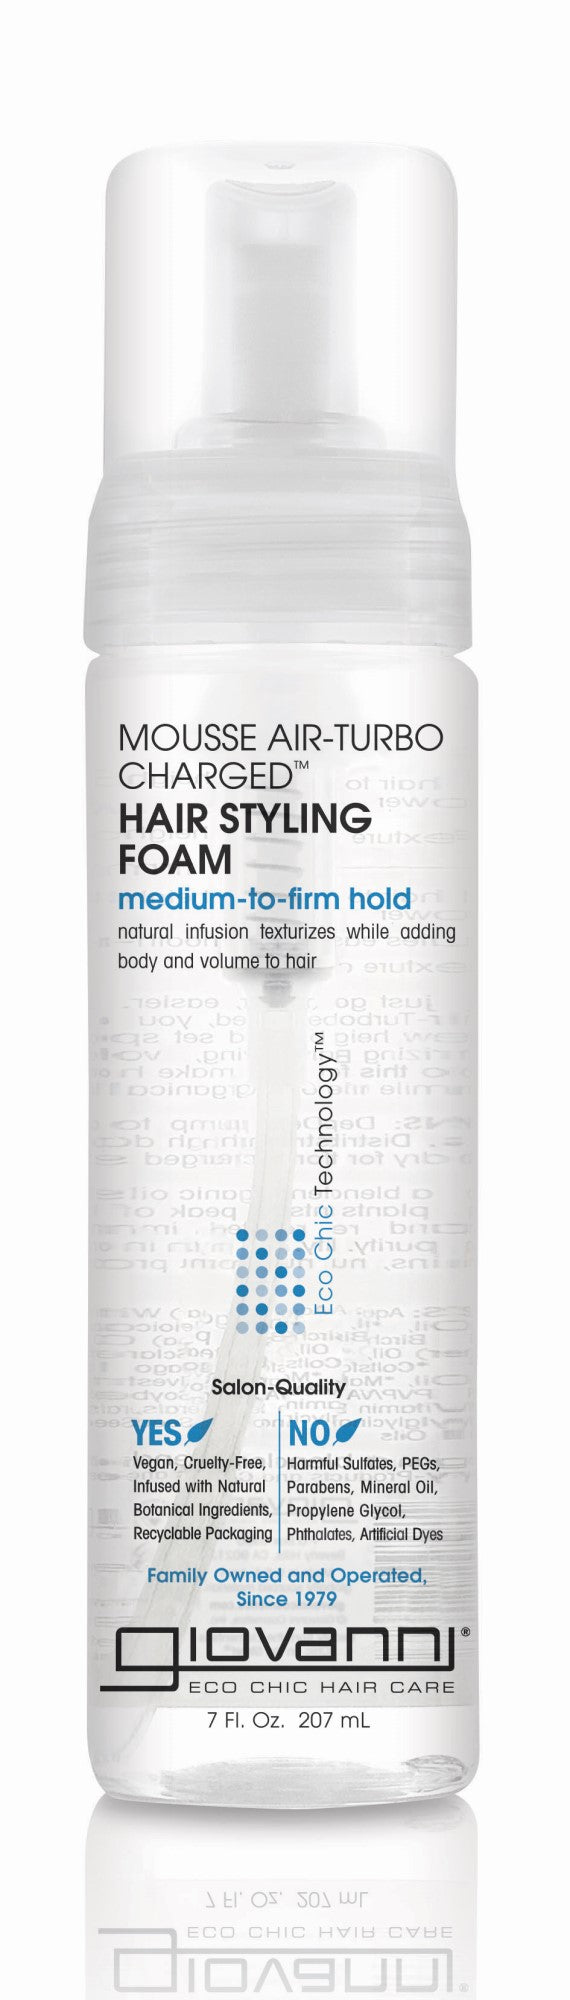 Giovanni Mousse Air-Turbo Charged Hair Styling Foam 207ml